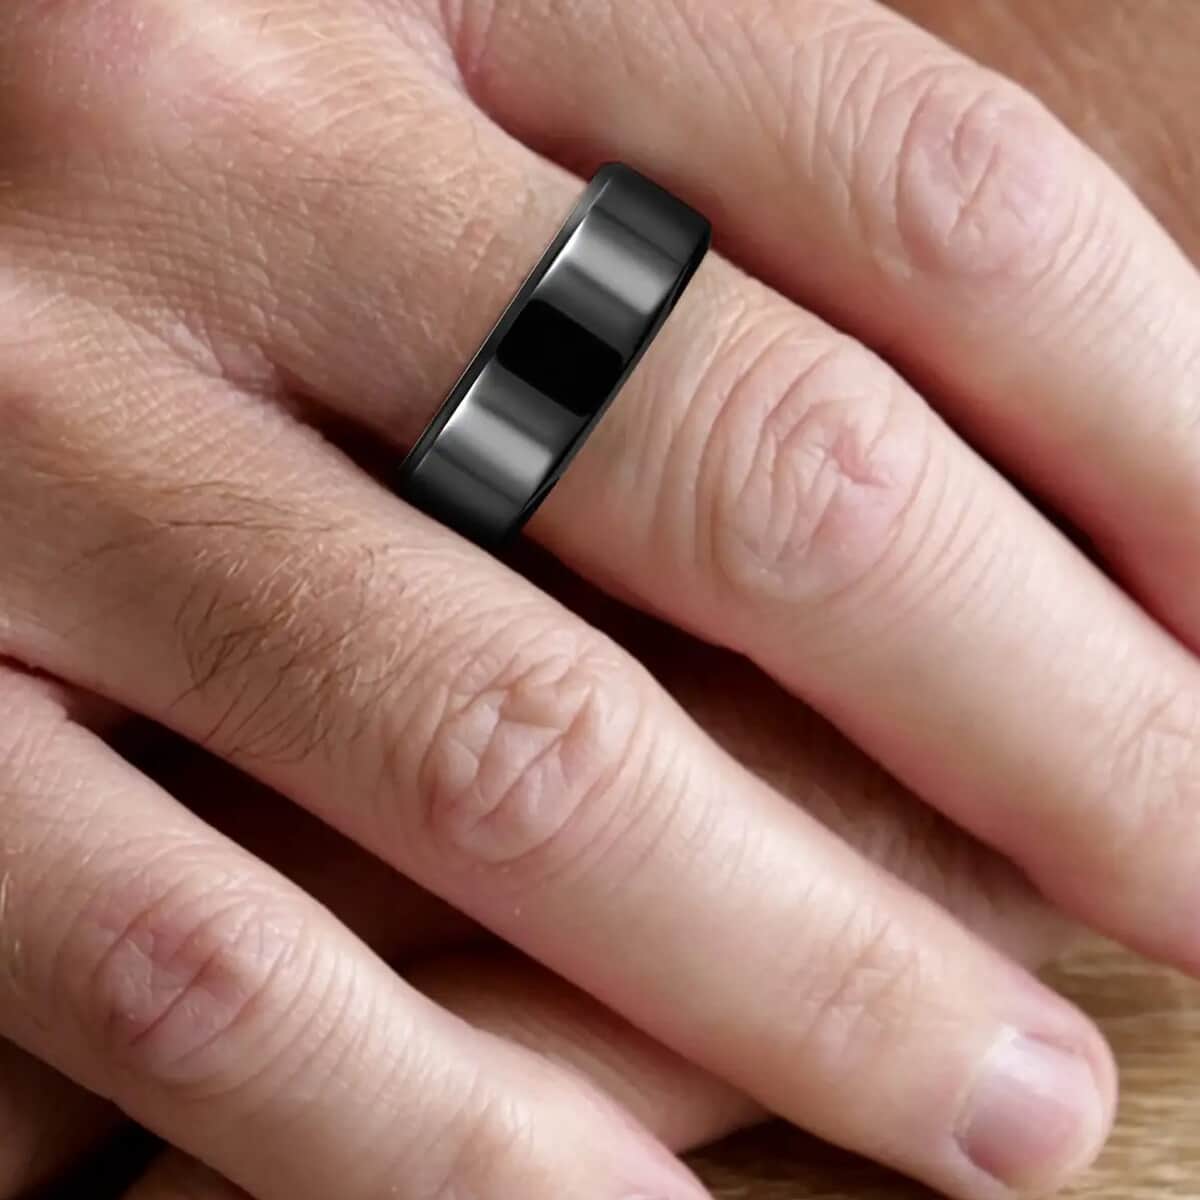 Soulsmart Multifunctional Health Tracker Smart Ring (Size 9.0) in ION Plated Black Stainless Steel (Compatible with Android 5.0+ & Apple IOS 10.0+ Systems) image number 8